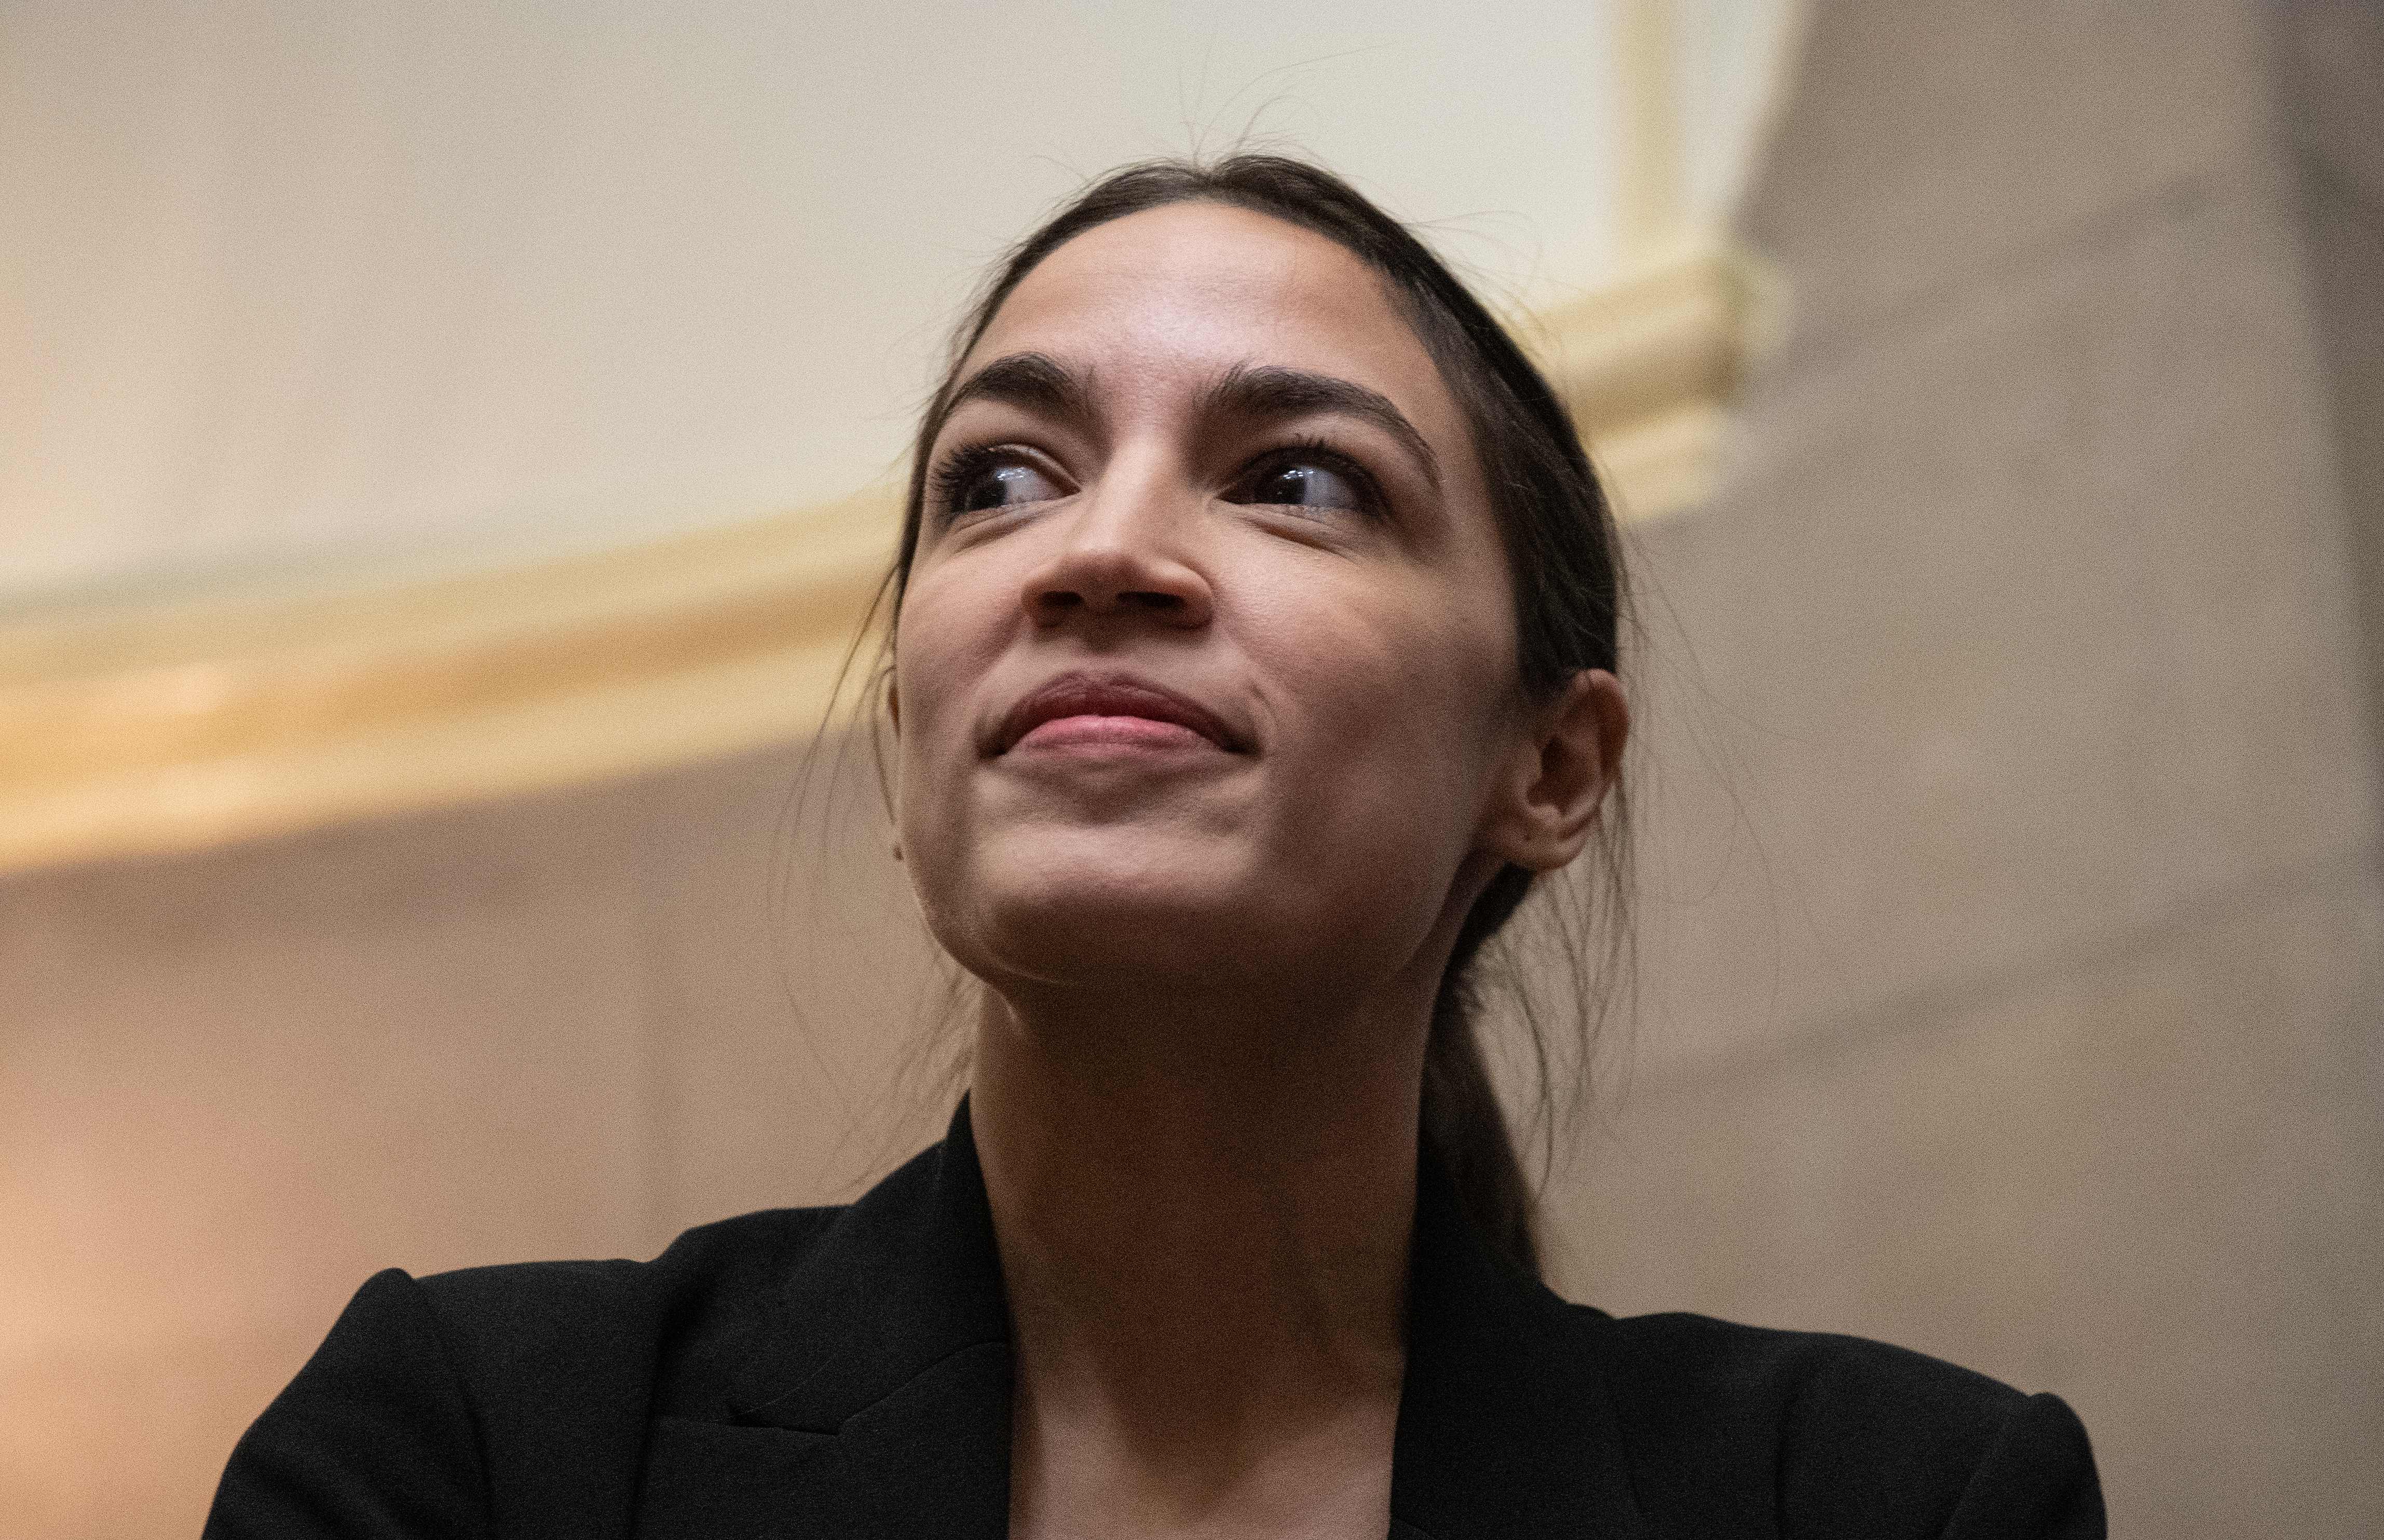 US Democratic Representative from New York Alexandria Ocasio Cortez looks on at the Capitol in Washington, DC, on January 16, 2019. (Photo by NICHOLAS KAMM / AFP) (Photo credit should read NICHOLAS KAMM/AFP/Getty Images)